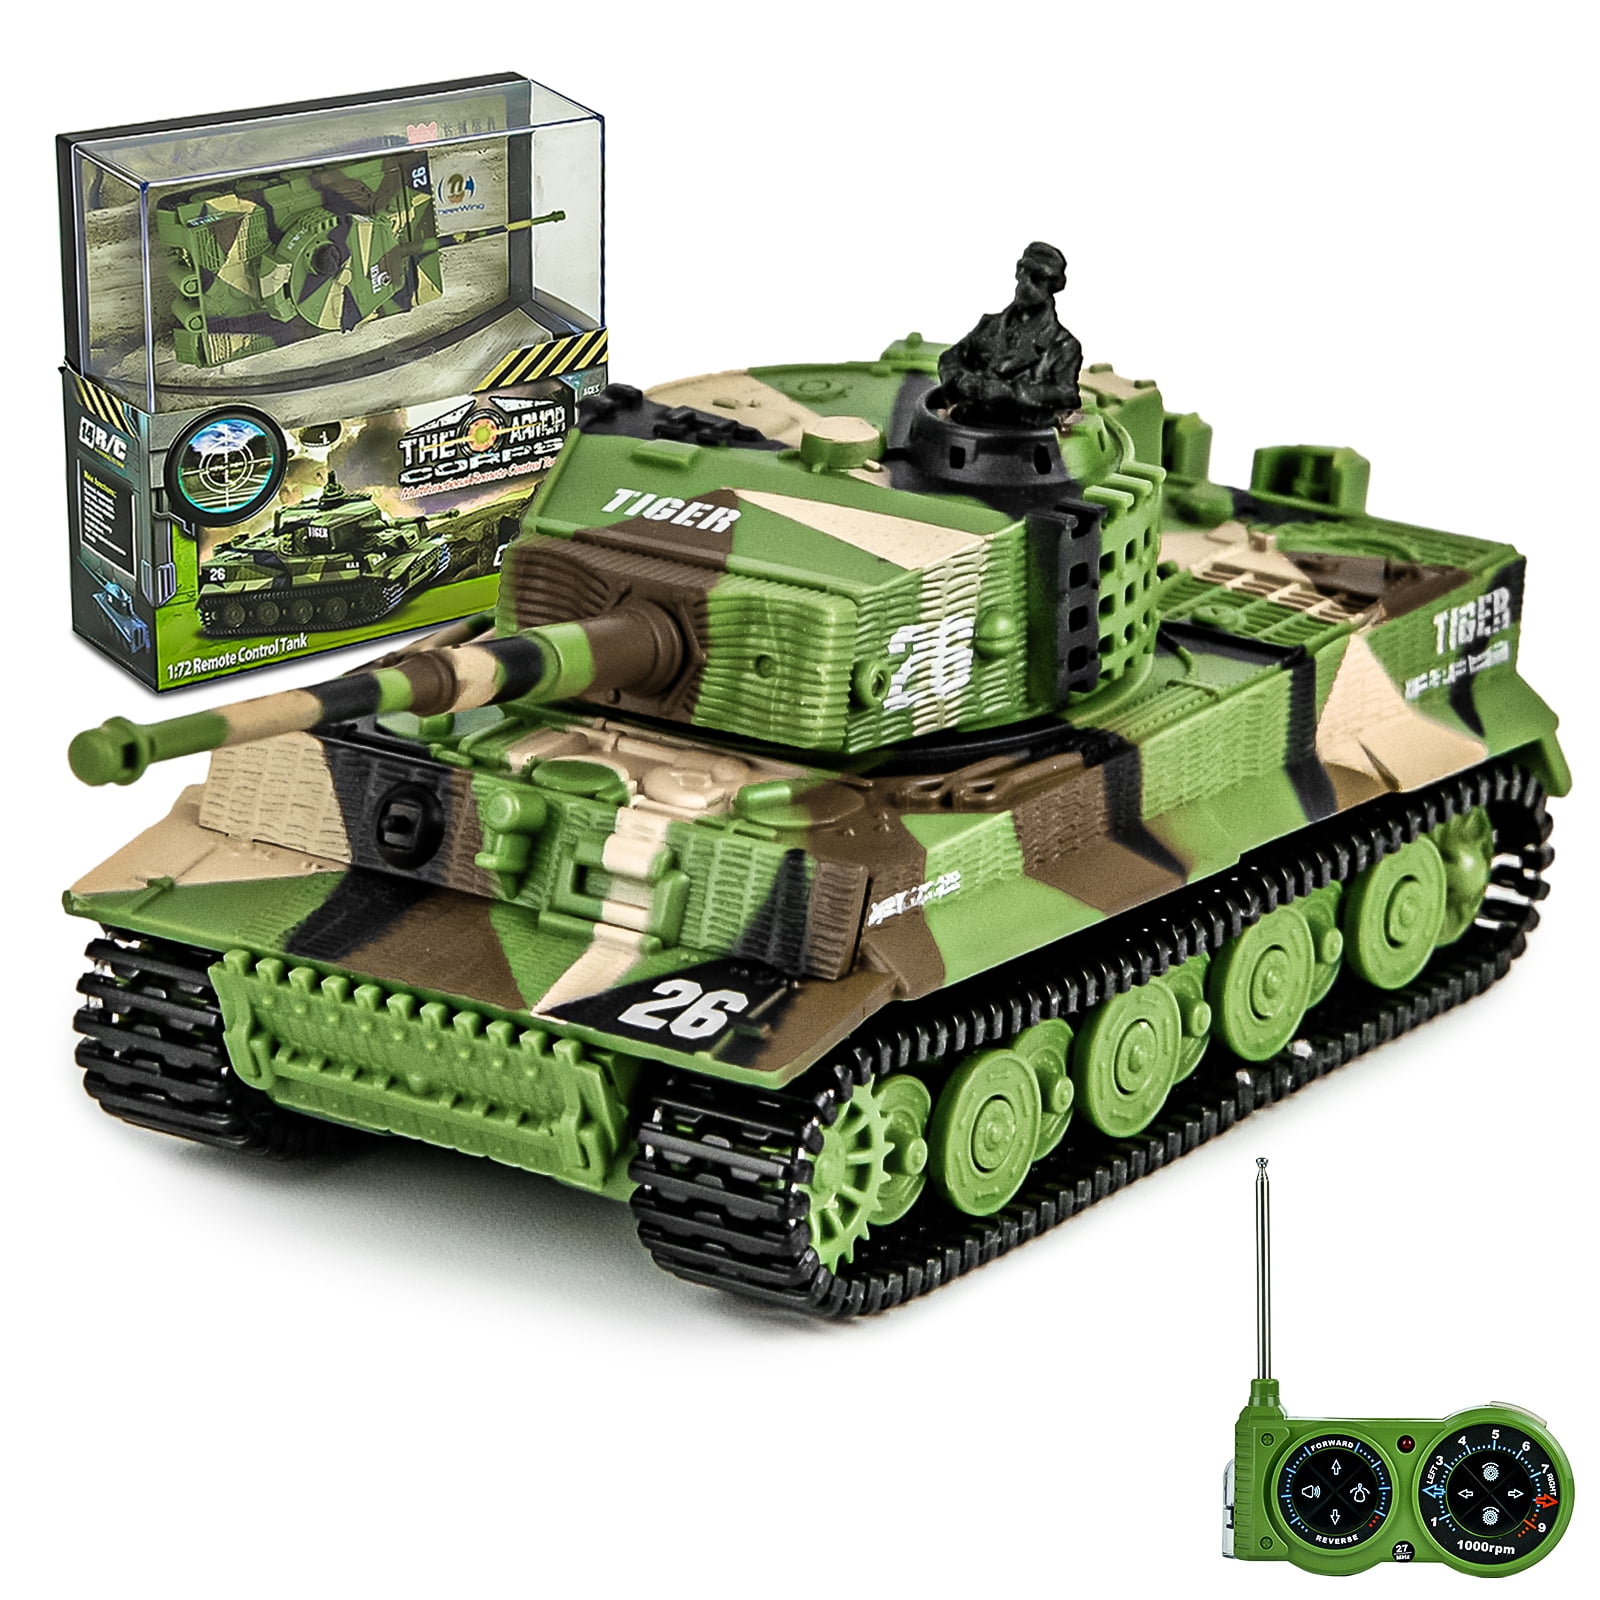 Bemico Remote Control Tank with USB Charger Cable Mini RC Toys Tank 1:72  German Tiger with Sound